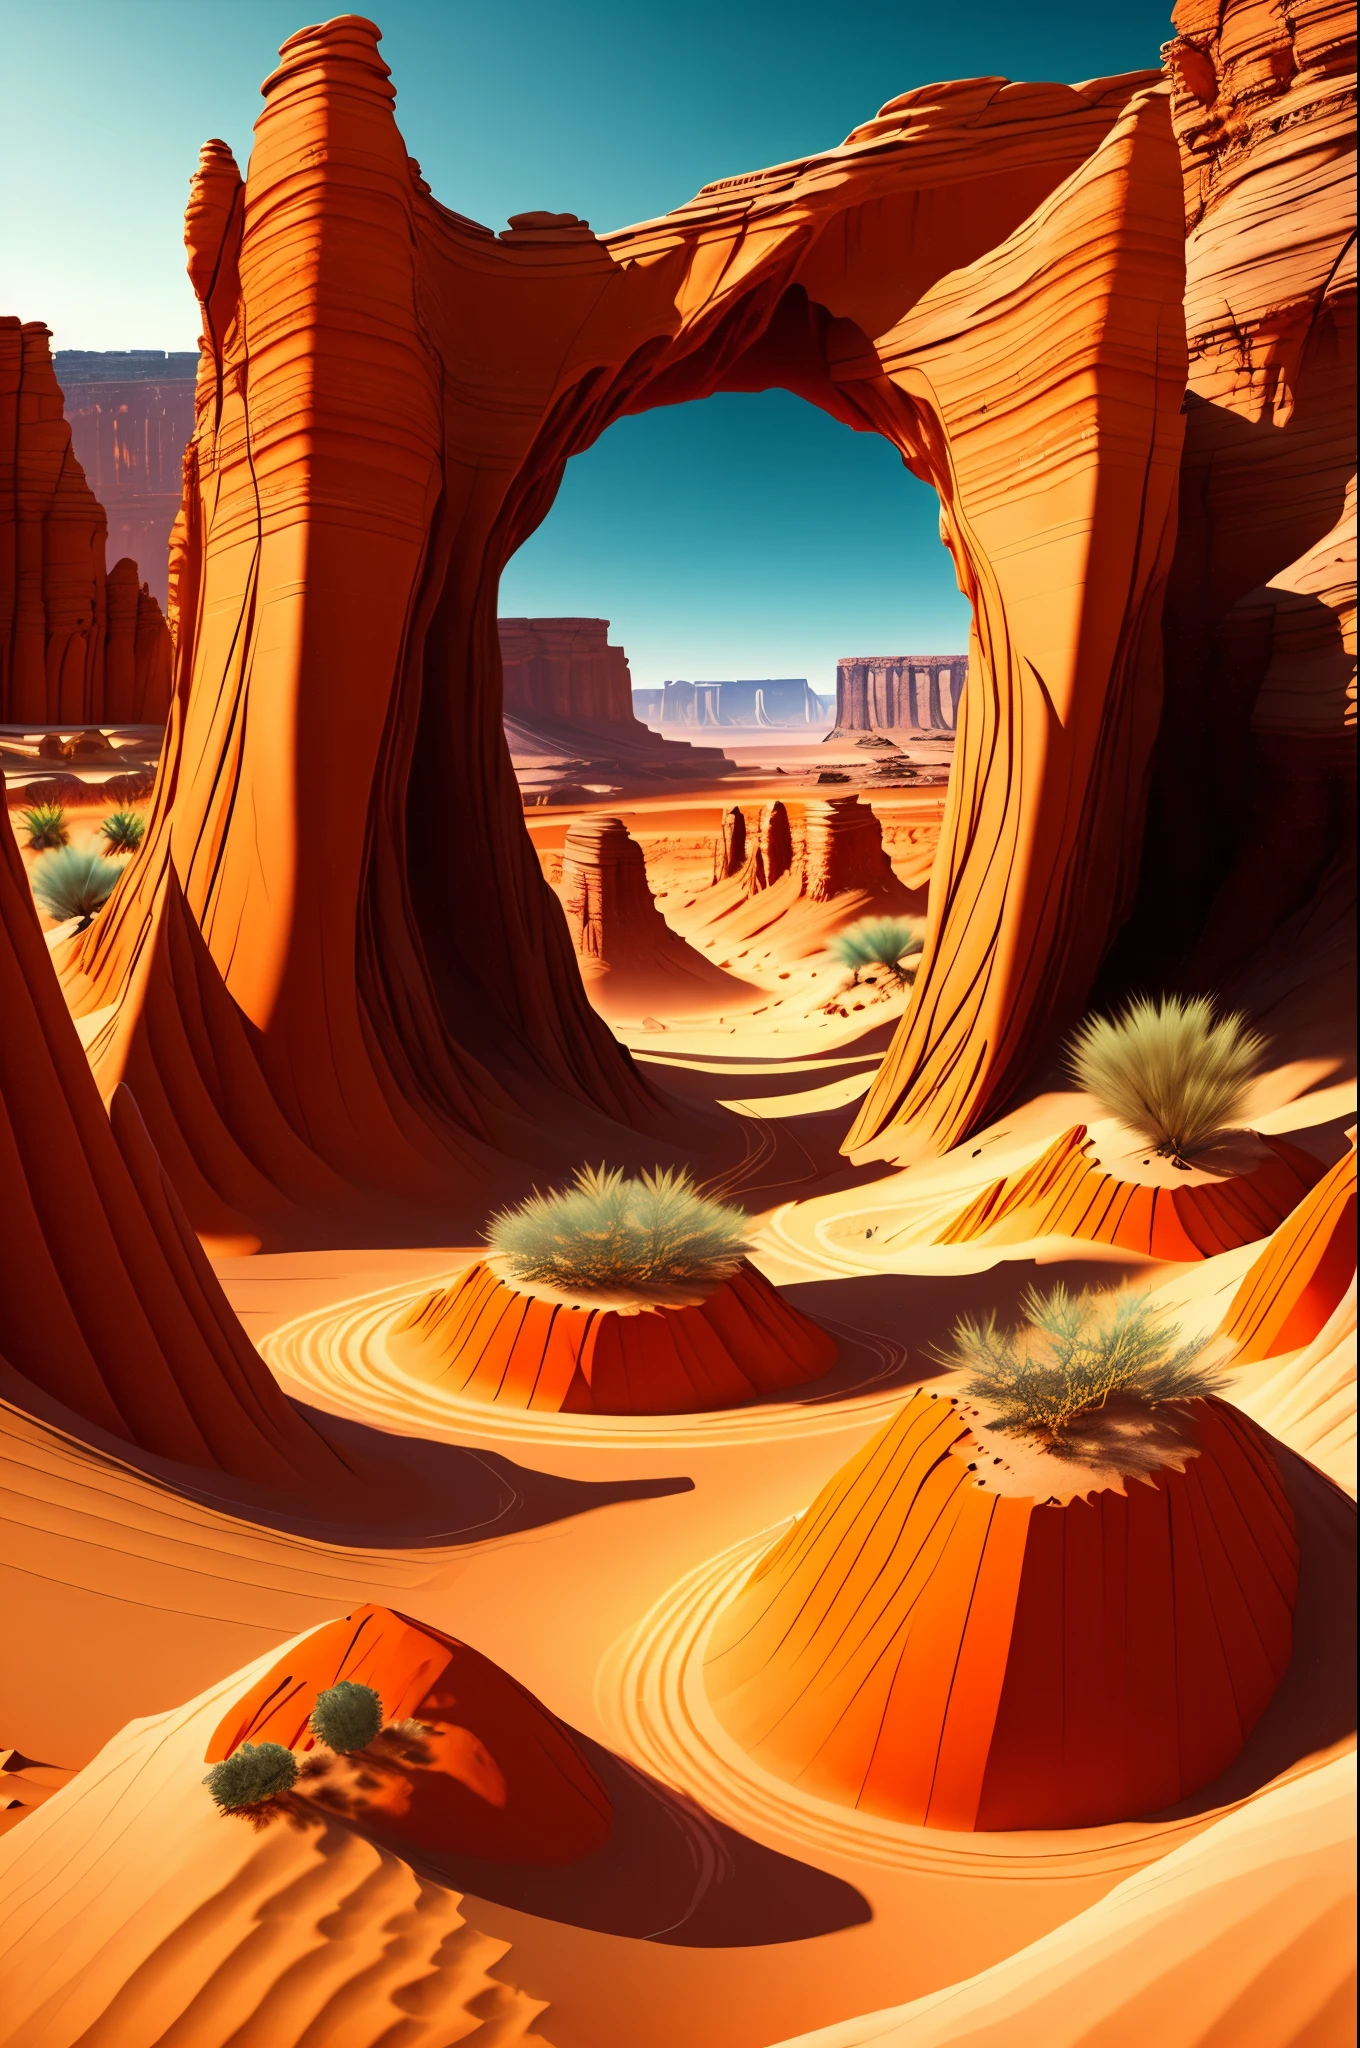 best quality,4k,highres,ultra-detailed,realistic,landscape,desert canyon,sandy terrain,sharp rock formations,dry and arid atmosphere,beaming sunlight,deep and narrow crevices,cacti and desert plants,scattered tumbleweeds,distant mountain range,vivid colors,orange and red color palette,warm sunlight casting long shadows,subtle wind blowing sand particles,hazy and distant horizon,line of sight stretching for miles,uninhabited and serene,majestic and awe-inspiring.